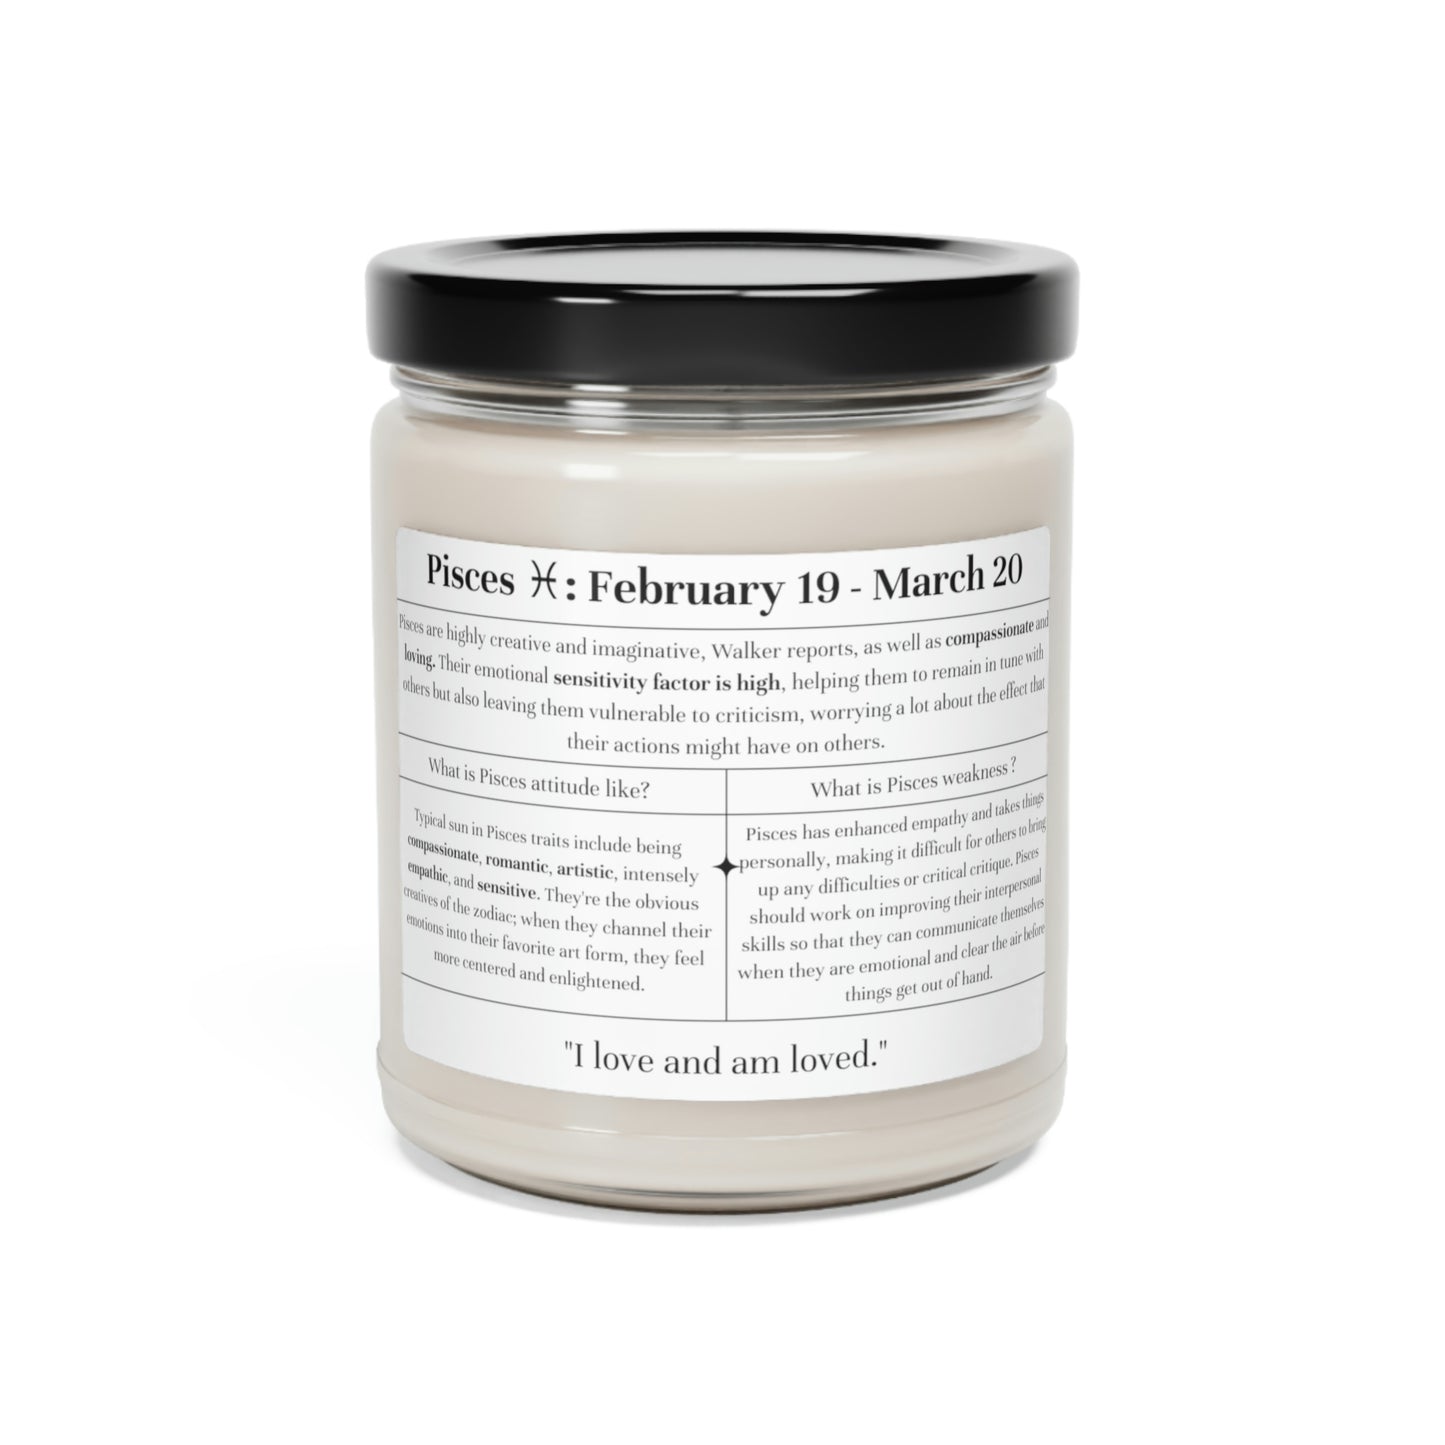 Pisces ♓️: February 19 - March 20 Candle Zodiac